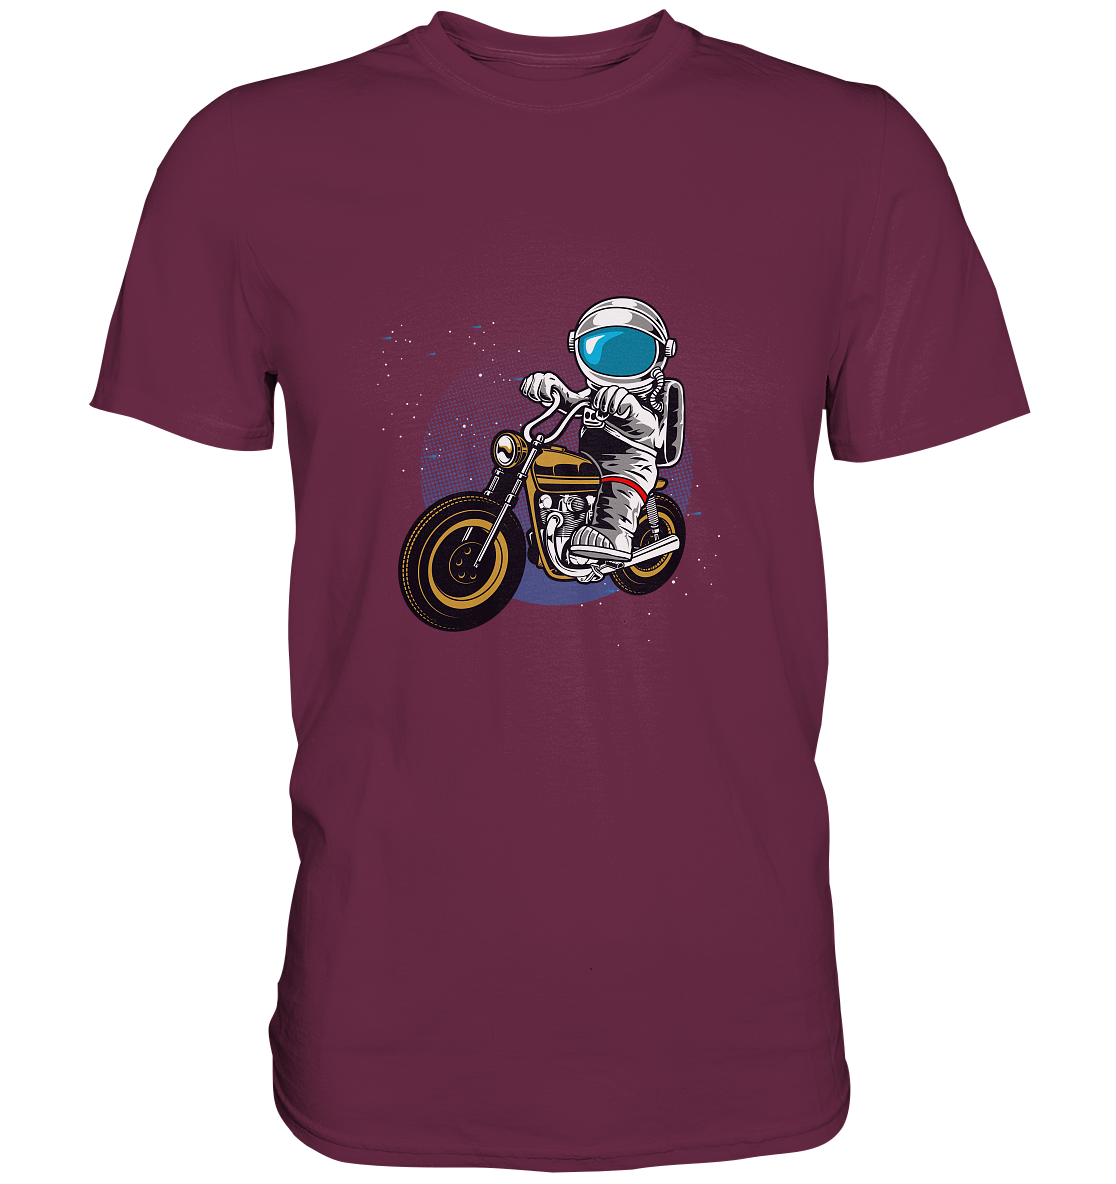 Fly me to the moon - Premium Unisex Shirt - mehrere Farben